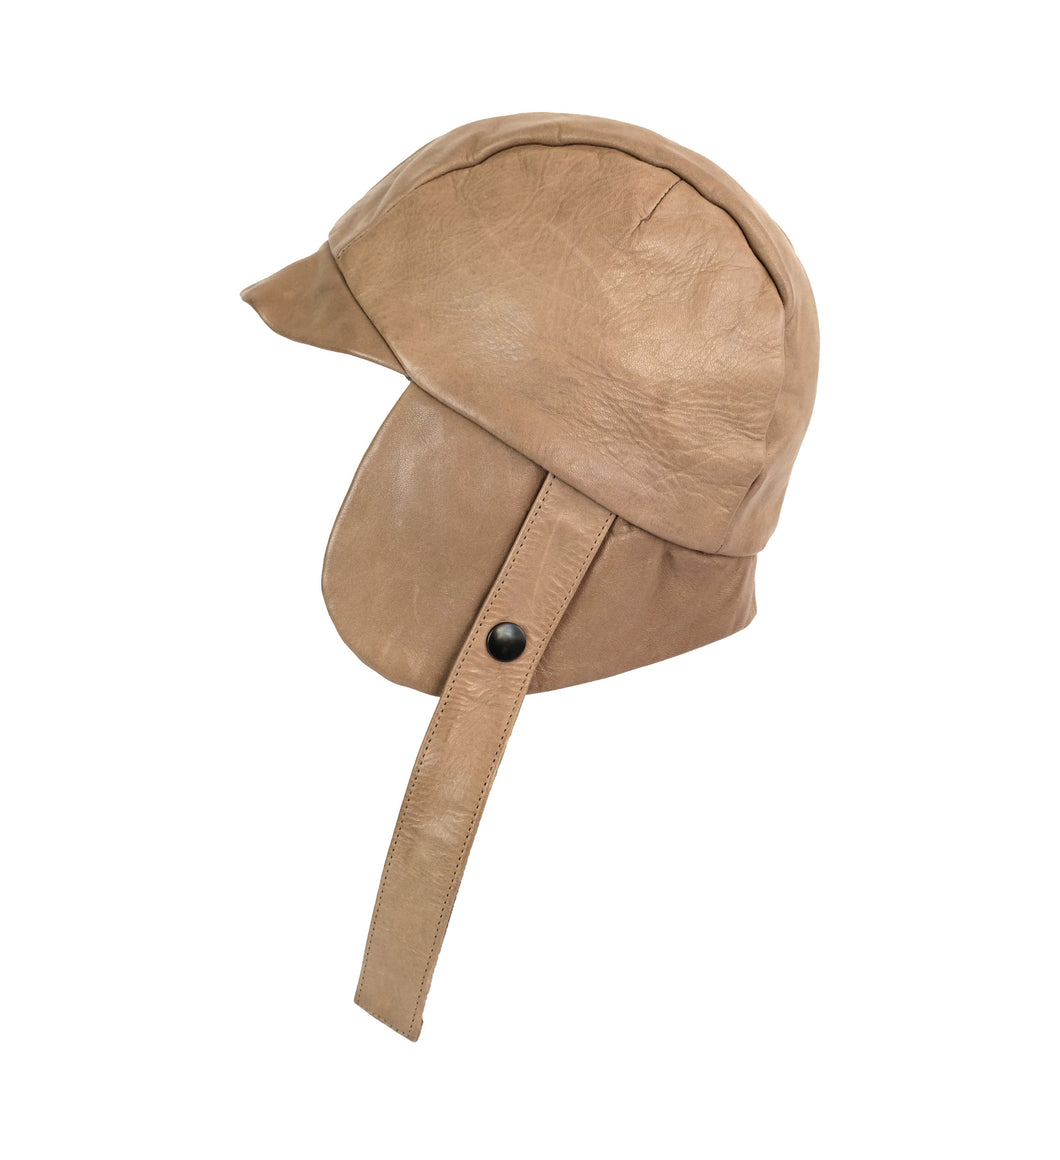 Ally Capellino Aviator Hat in Menage M Vintage Taupe Leather, – Modern